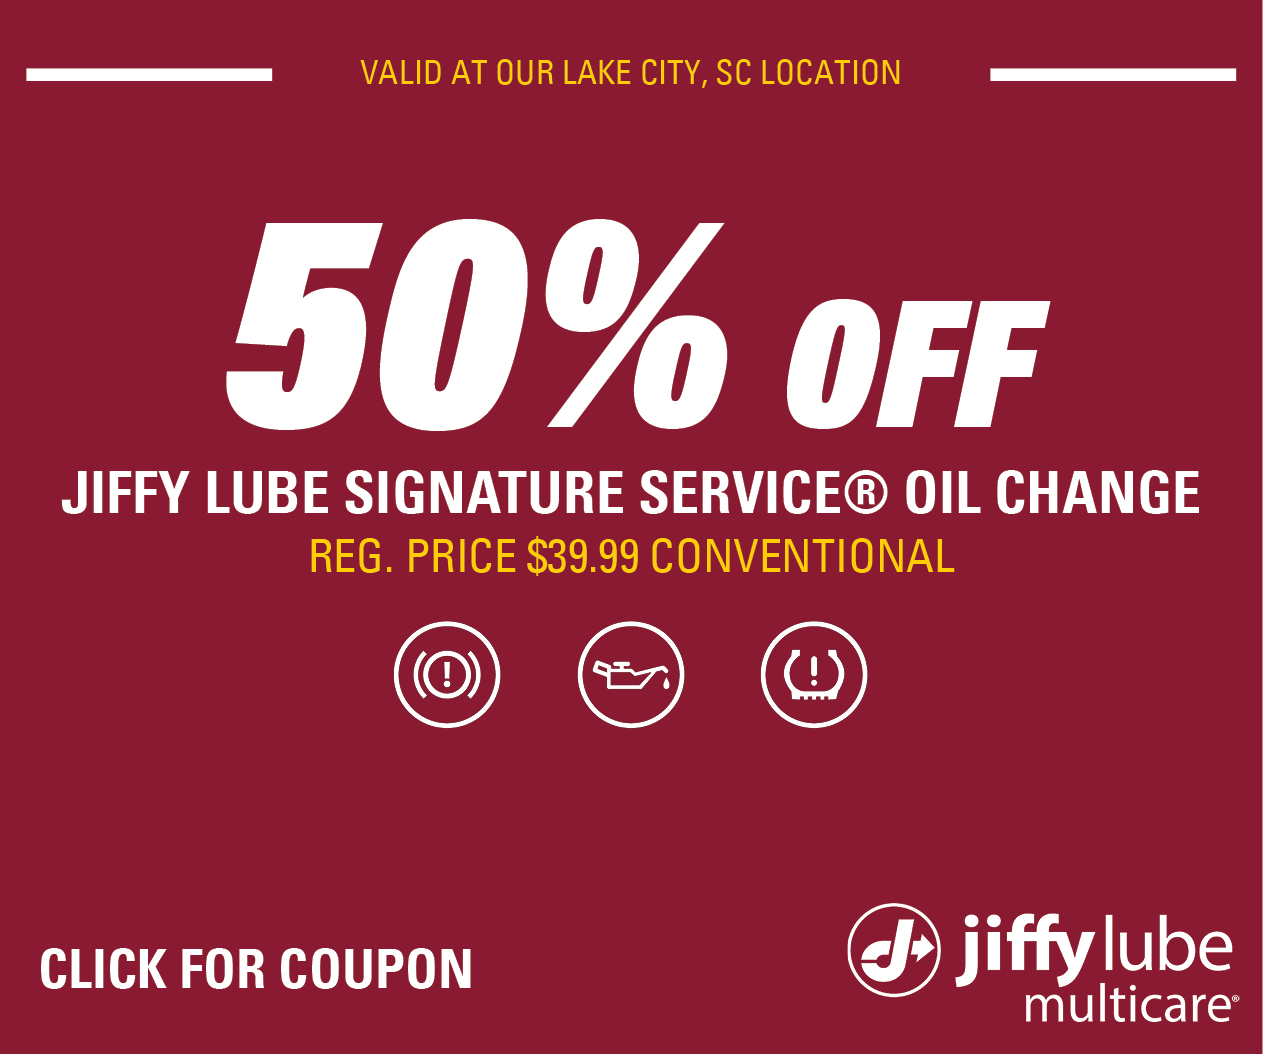 50% OFF Conventional SSOC Lake City Display Ad Website Image (Bronco Lube)